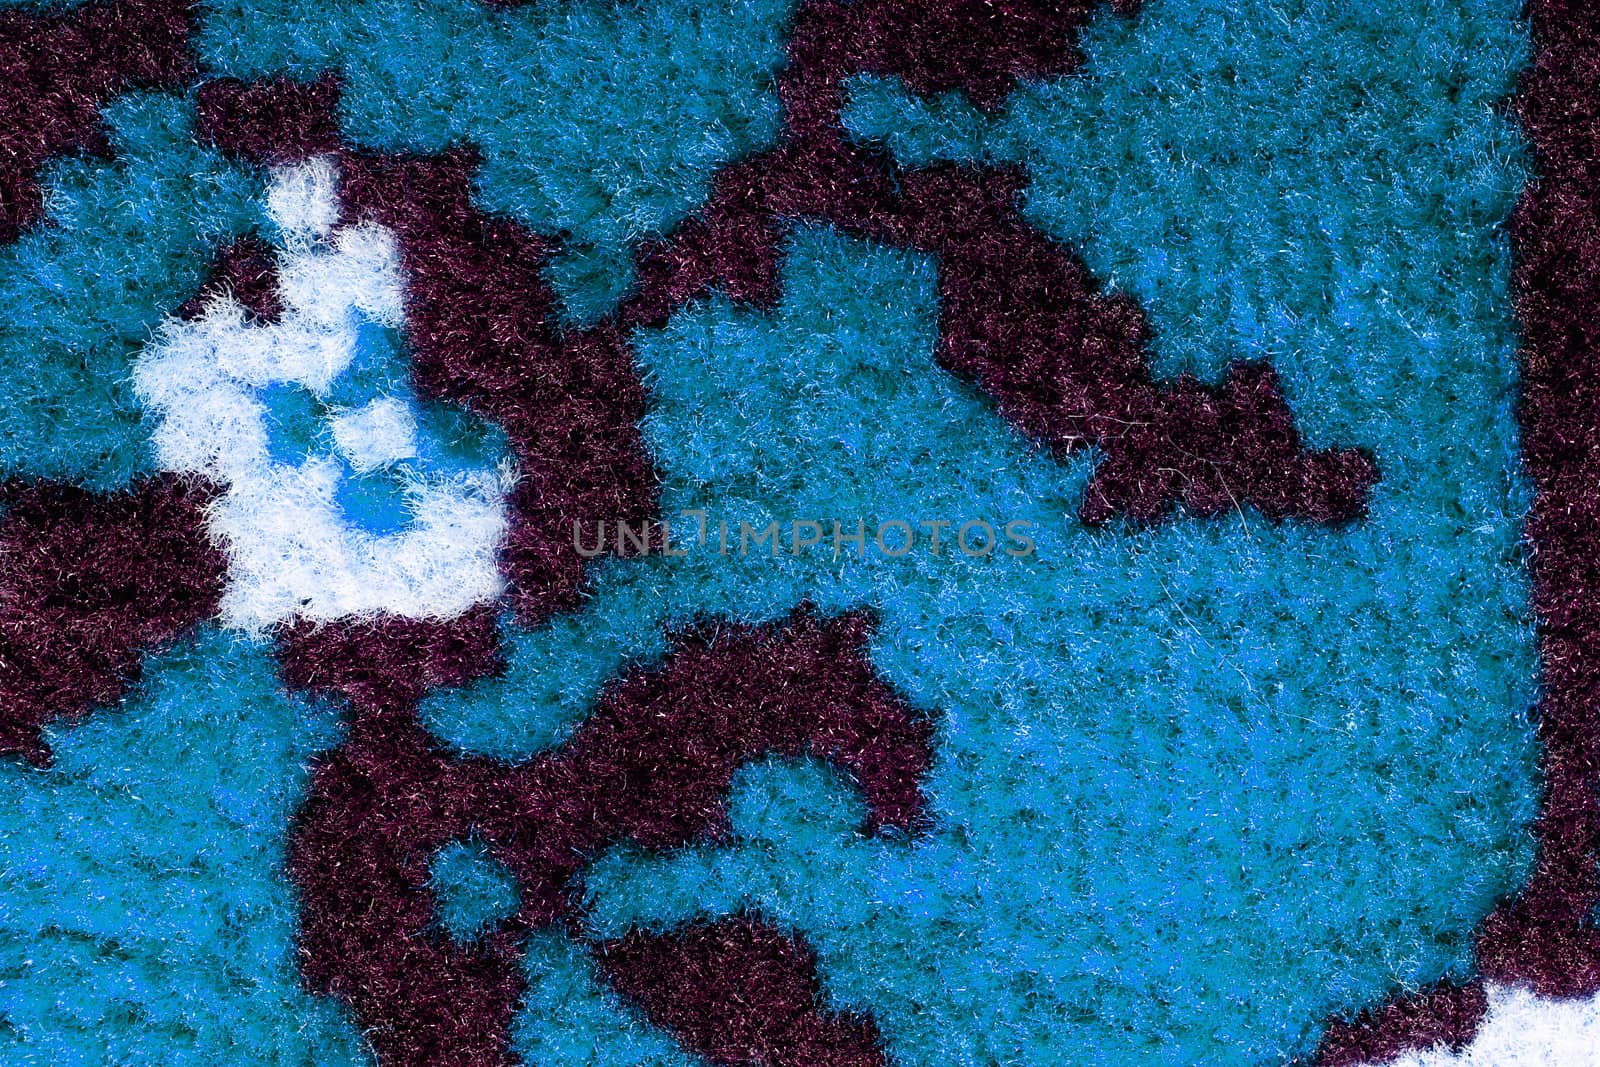 Hand woven carpet pattern, close up view